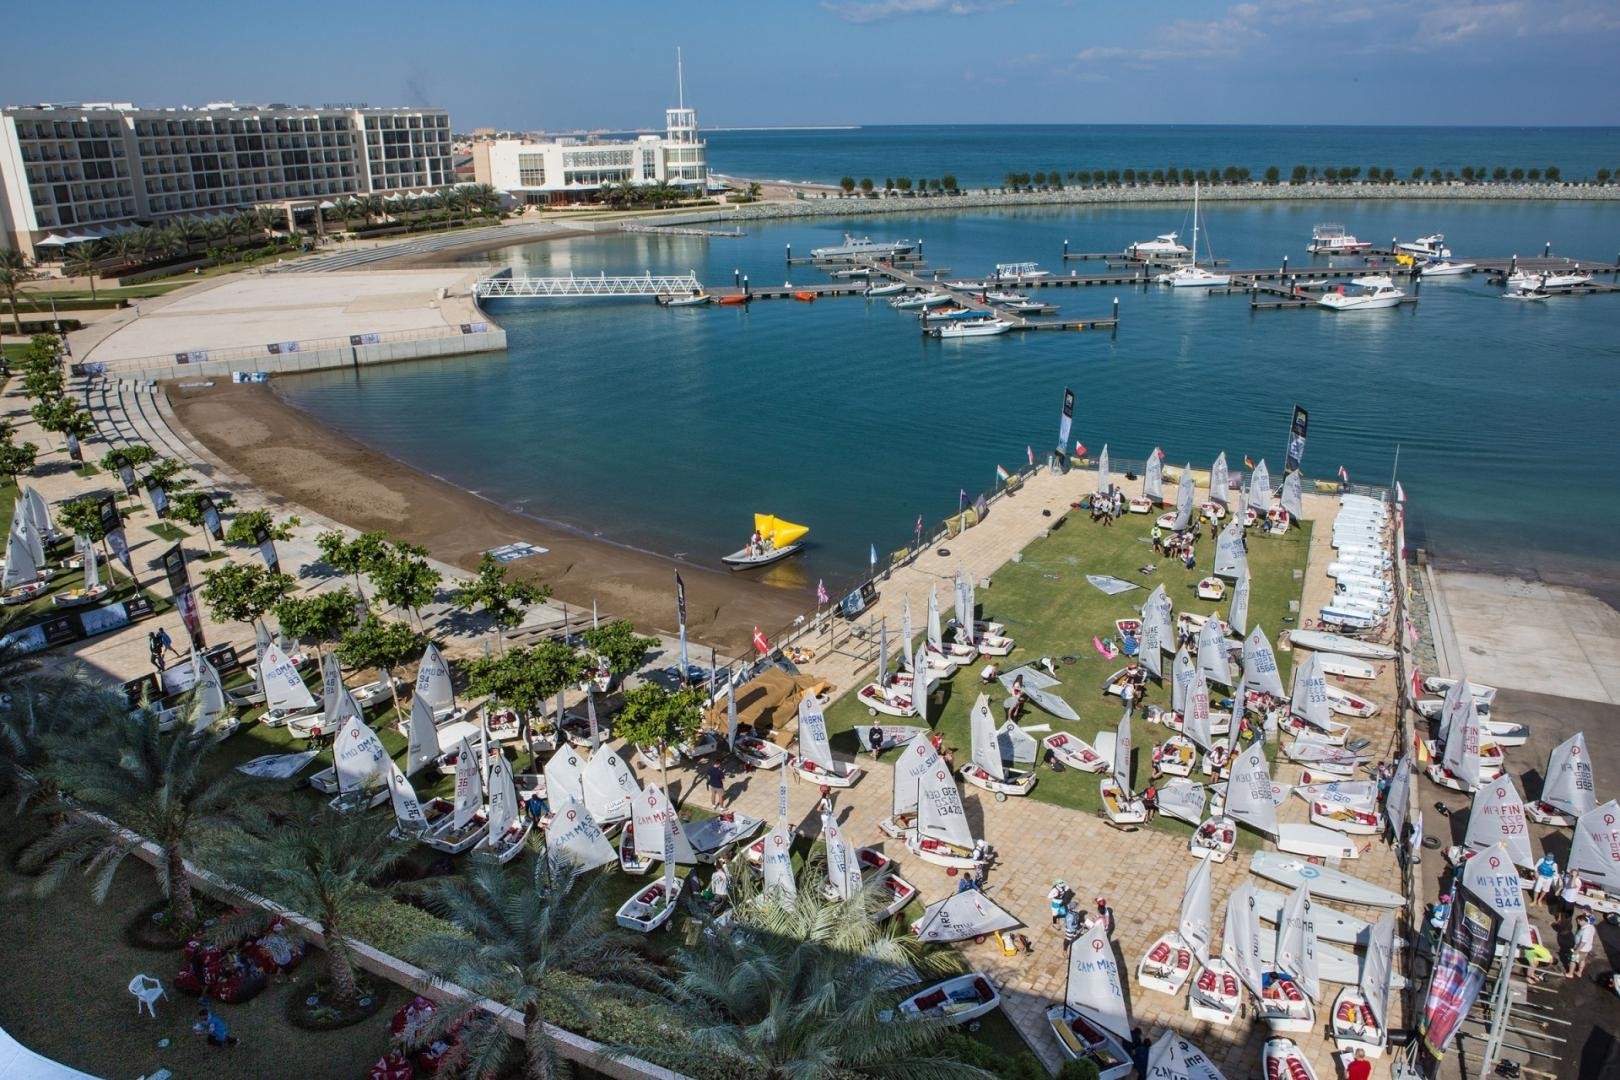 Youth Sailing World Championships to come in Oman December 2021